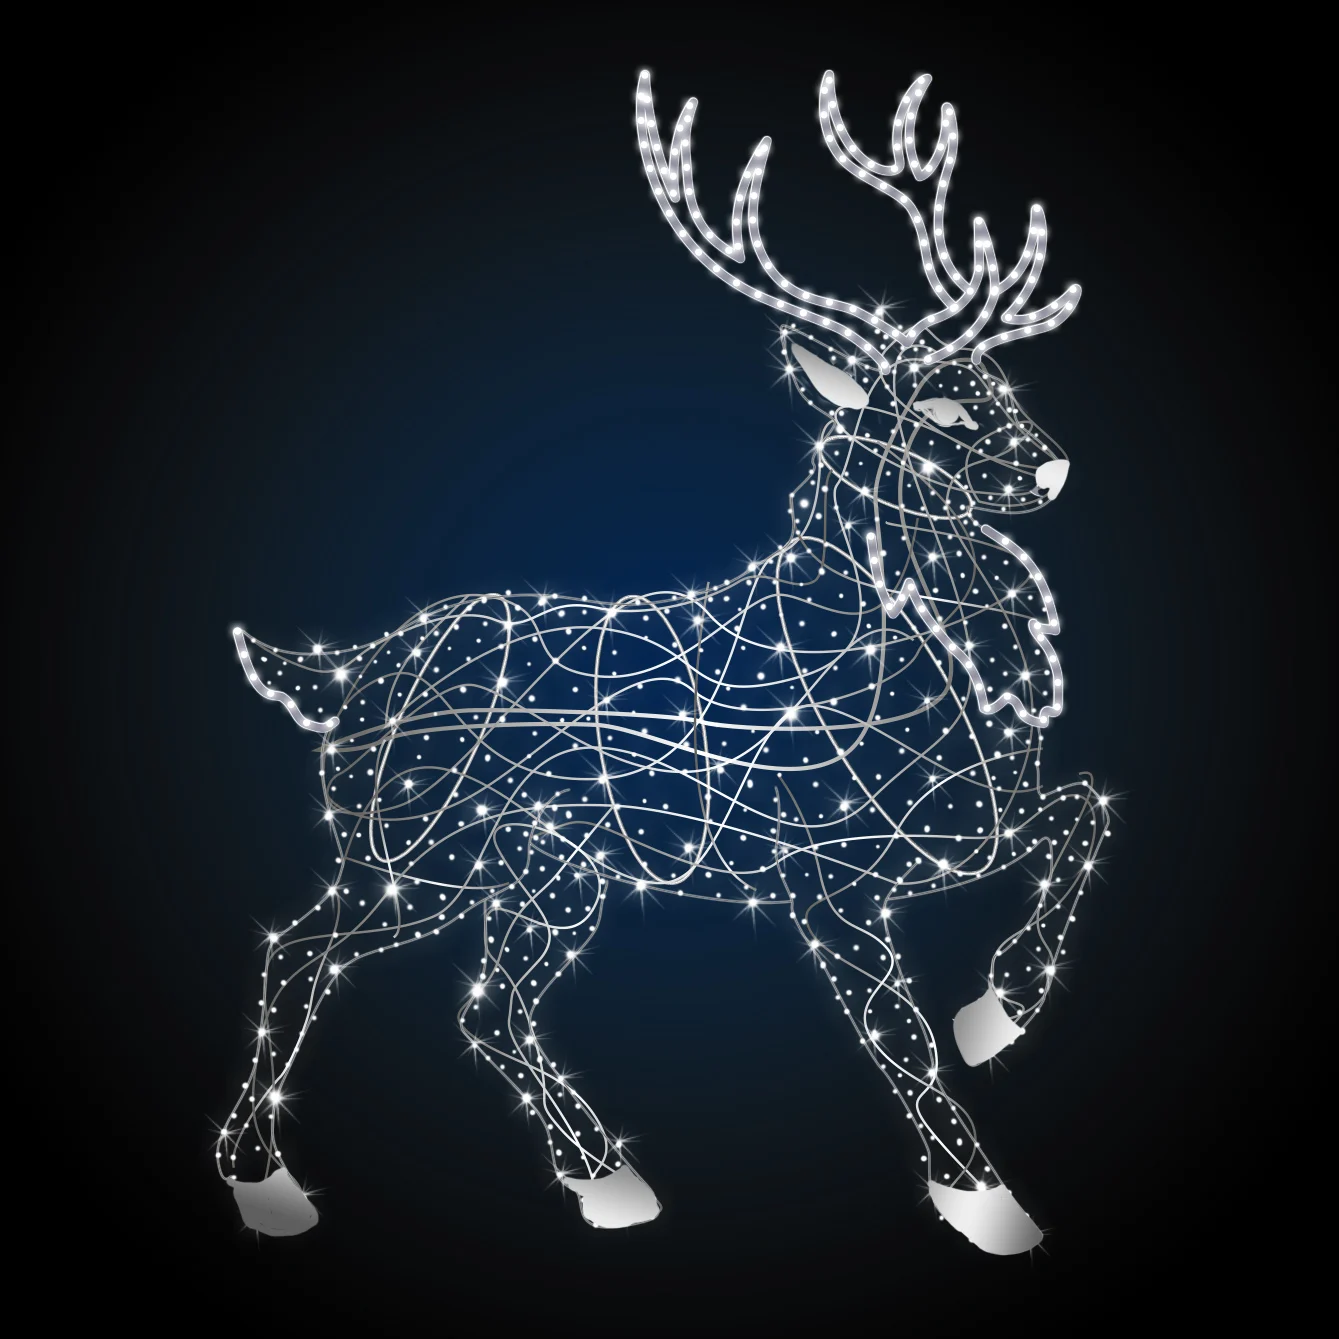 3d Deer Made Of Wire Rod With Led Lights For Outdoor Christmas Decoration Buy Deer Made Of Wire Rod With Led Lights For Outdoor Christmas Decoration Led Street Light Chrismas Decoration Product On